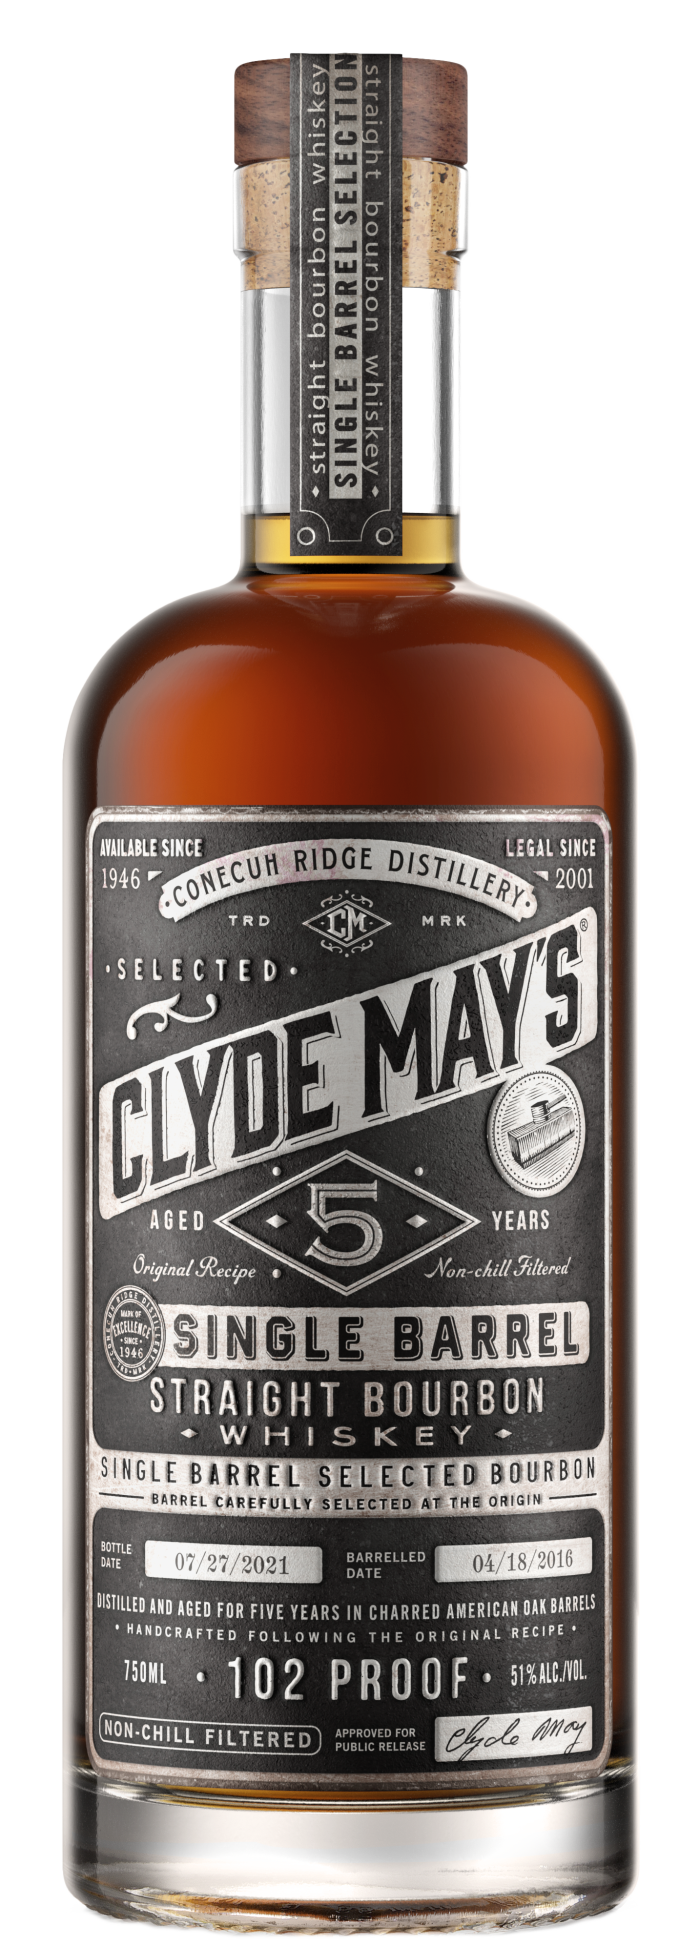 Clyde May's aged five years single barrel straight bourbon whiskey